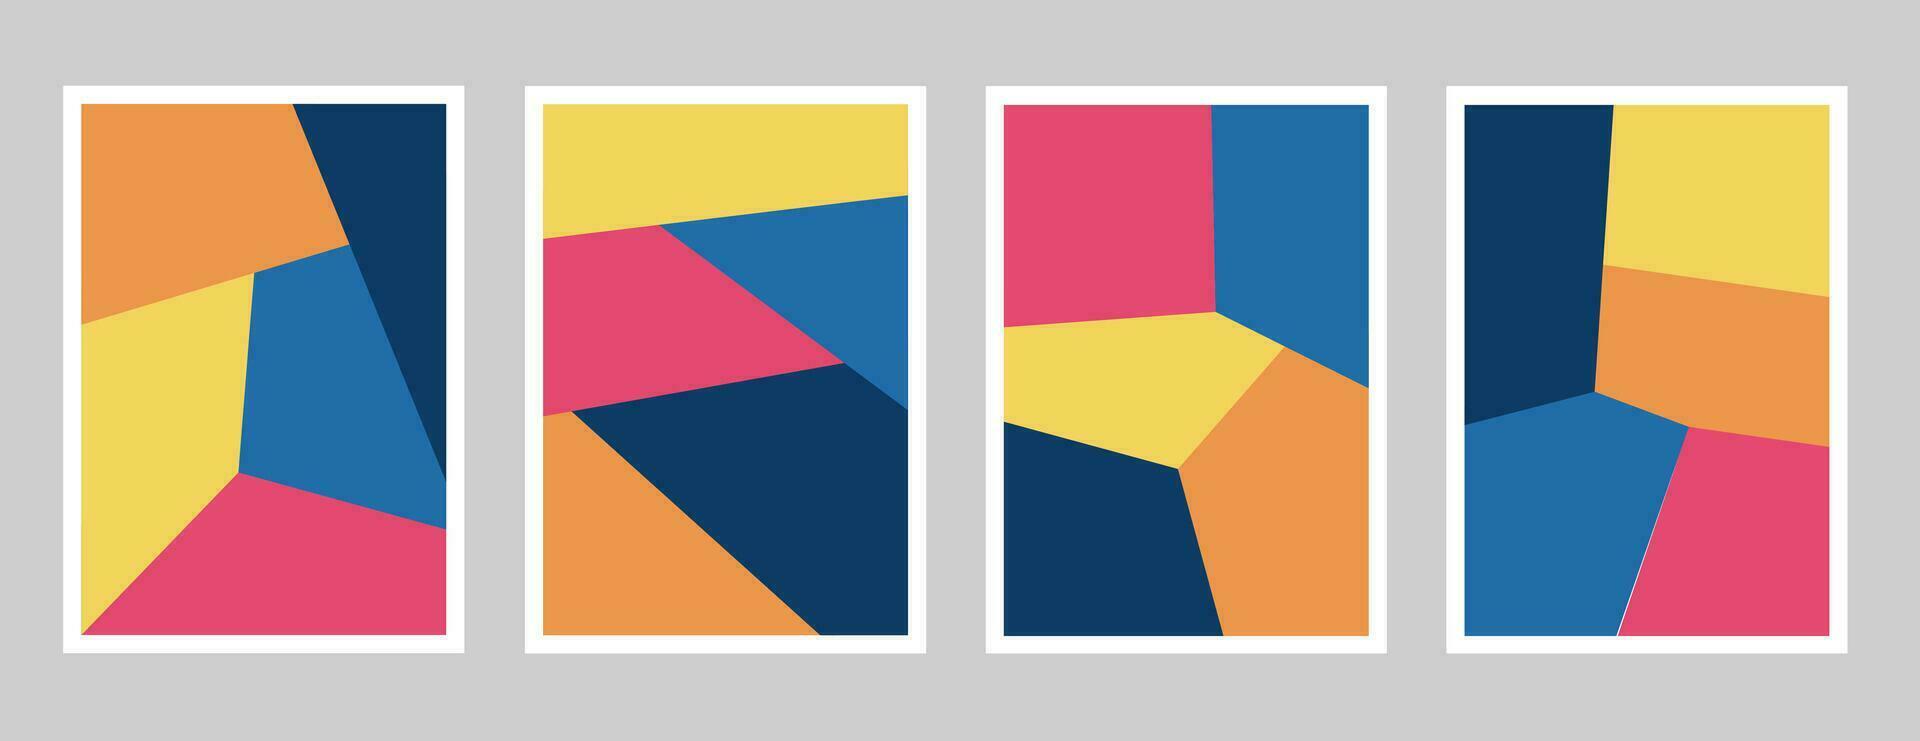 Set of abstract poster colorful geometric shapes. Primitive blocks suprematism style. Modern vector illustration